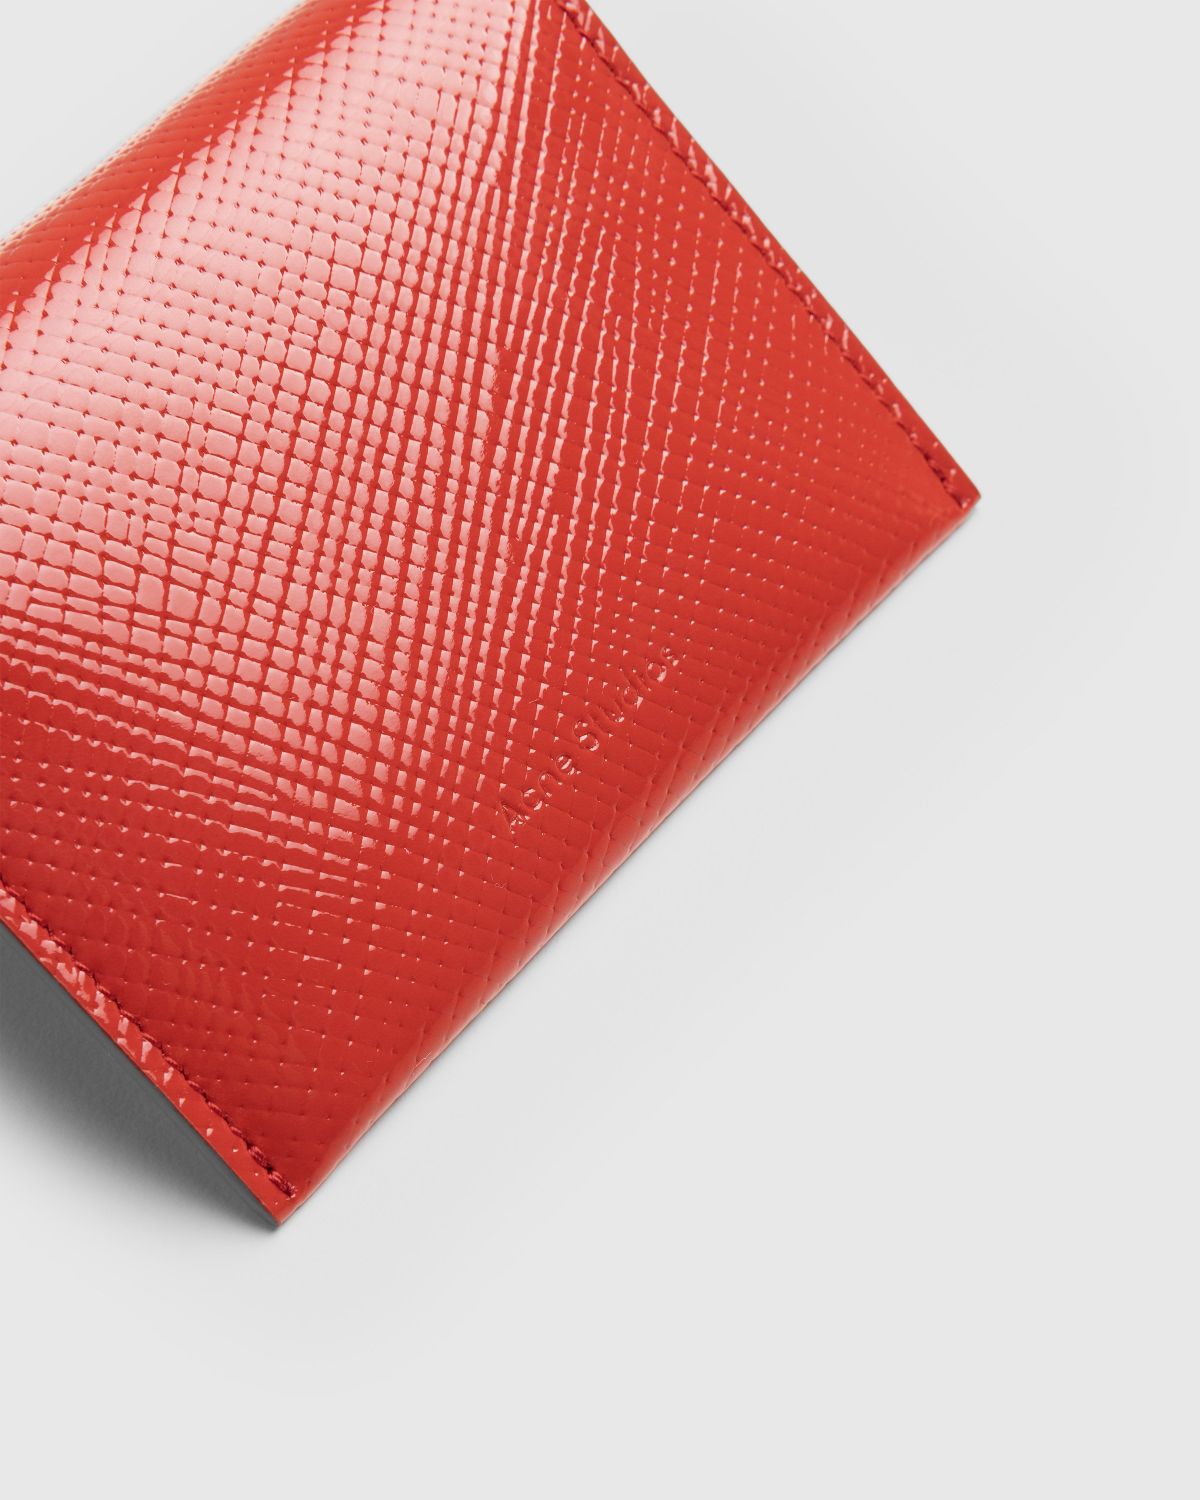 Acne Studios – Folded Card Holder Red - Wallets - Red - Image 4